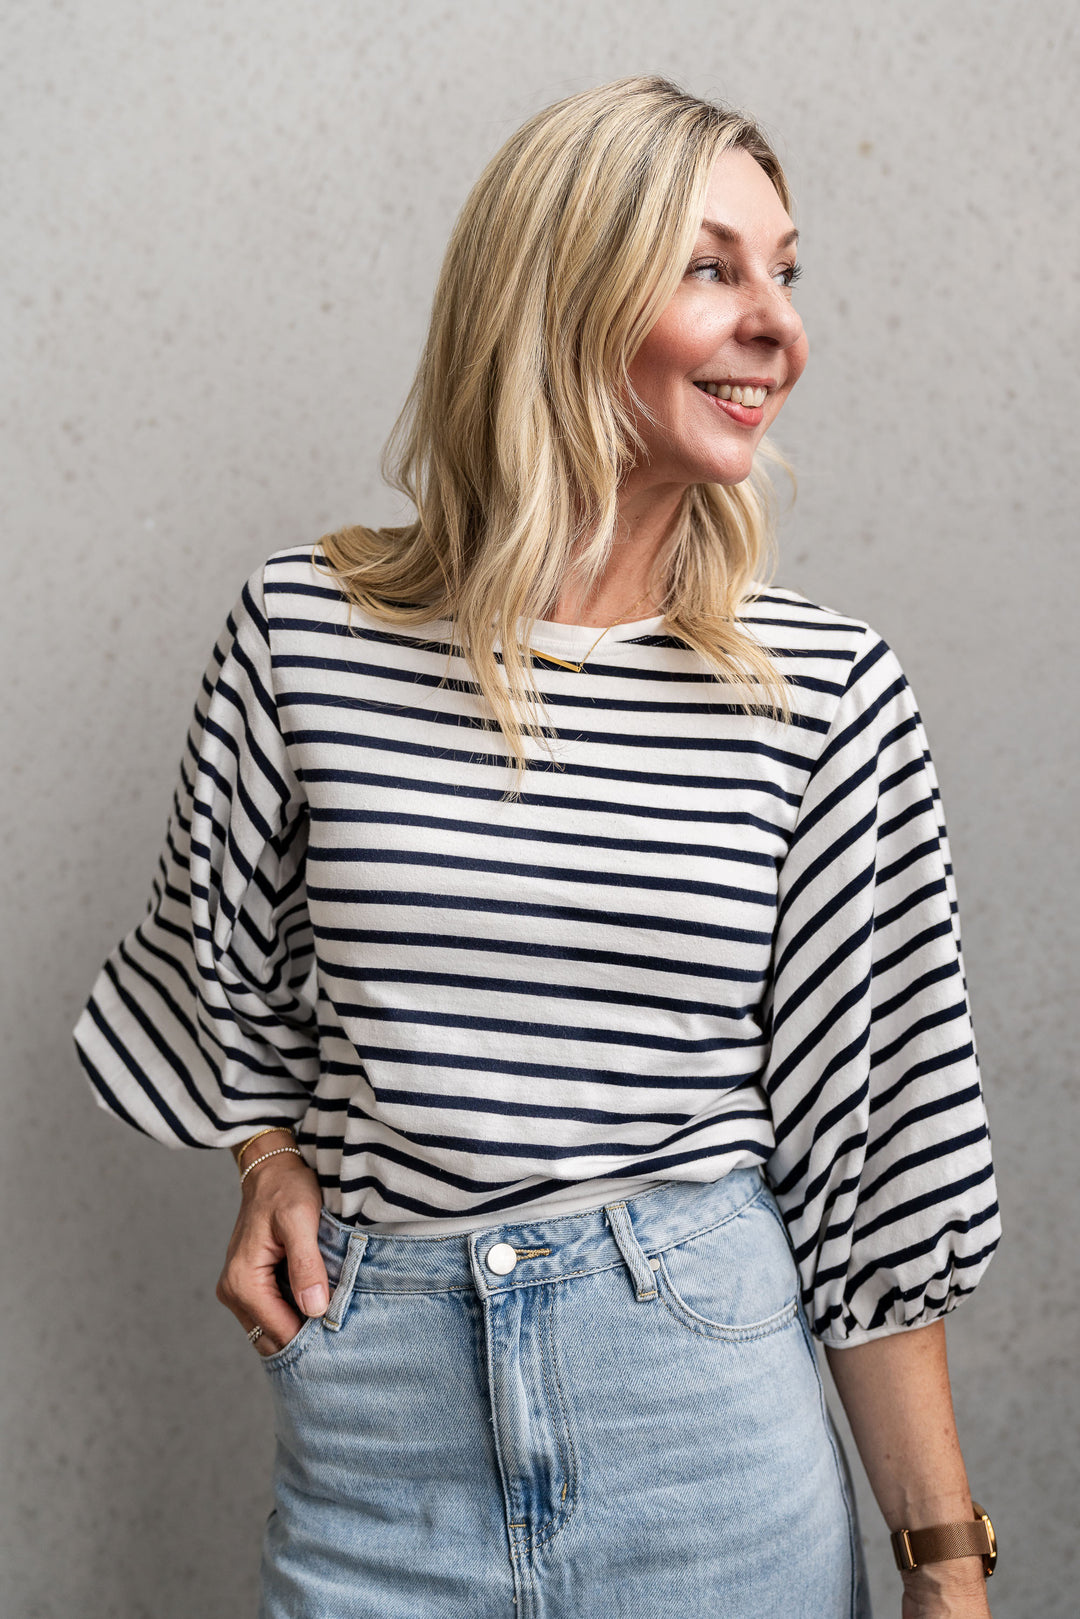 Styling our Breton Top has never been easier